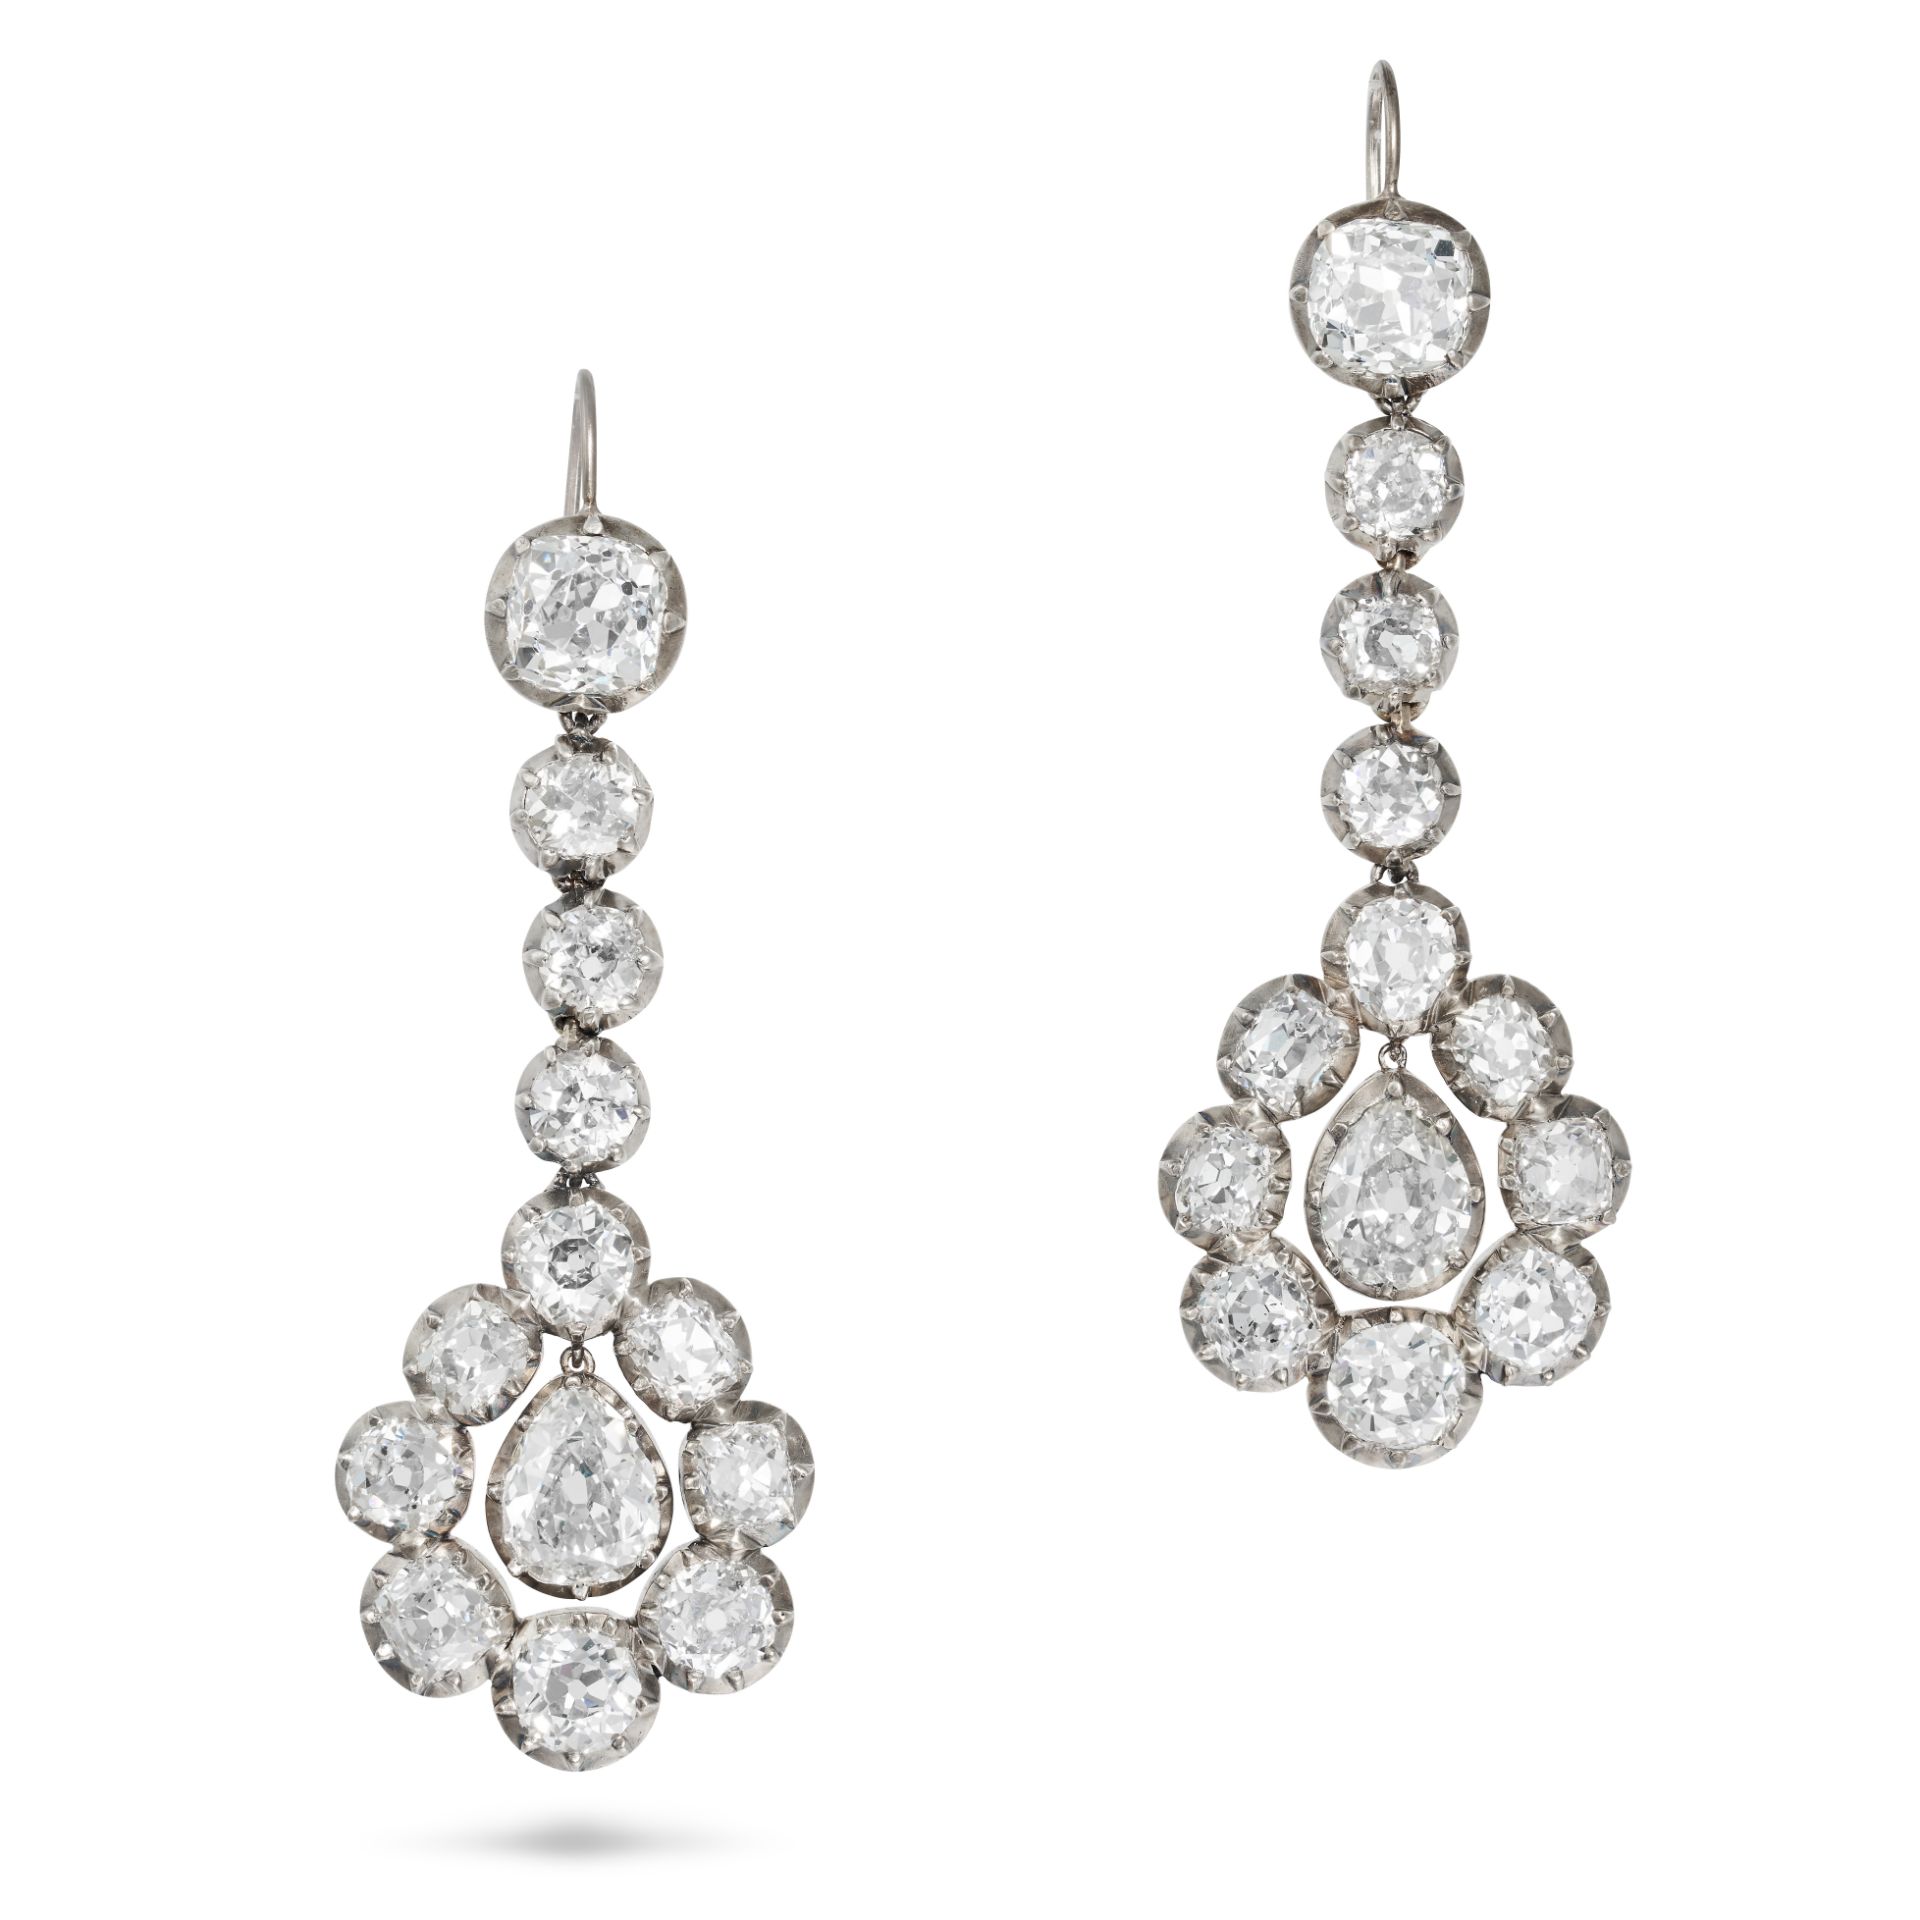 AN IMPORTANT PAIR OF FINE ANTIQUE DIAMOND DROP EARRINGS, 19TH CENTURY AND LATER in yellow gold